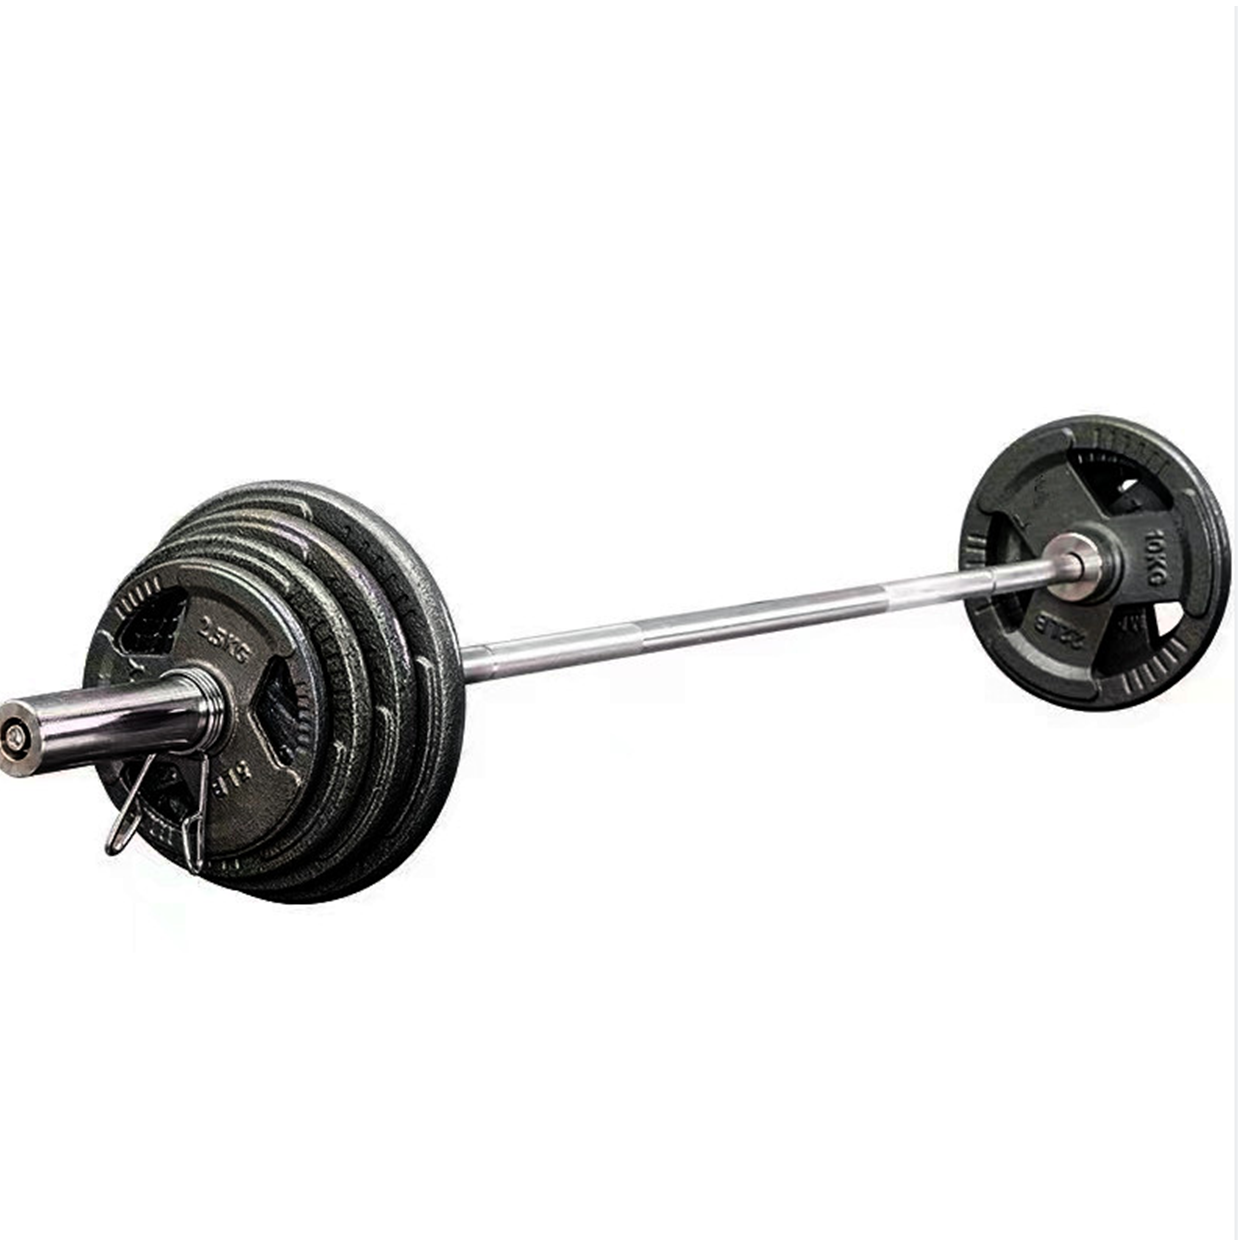 100KG Metal Weights Set with 20KG Olympic Barbell